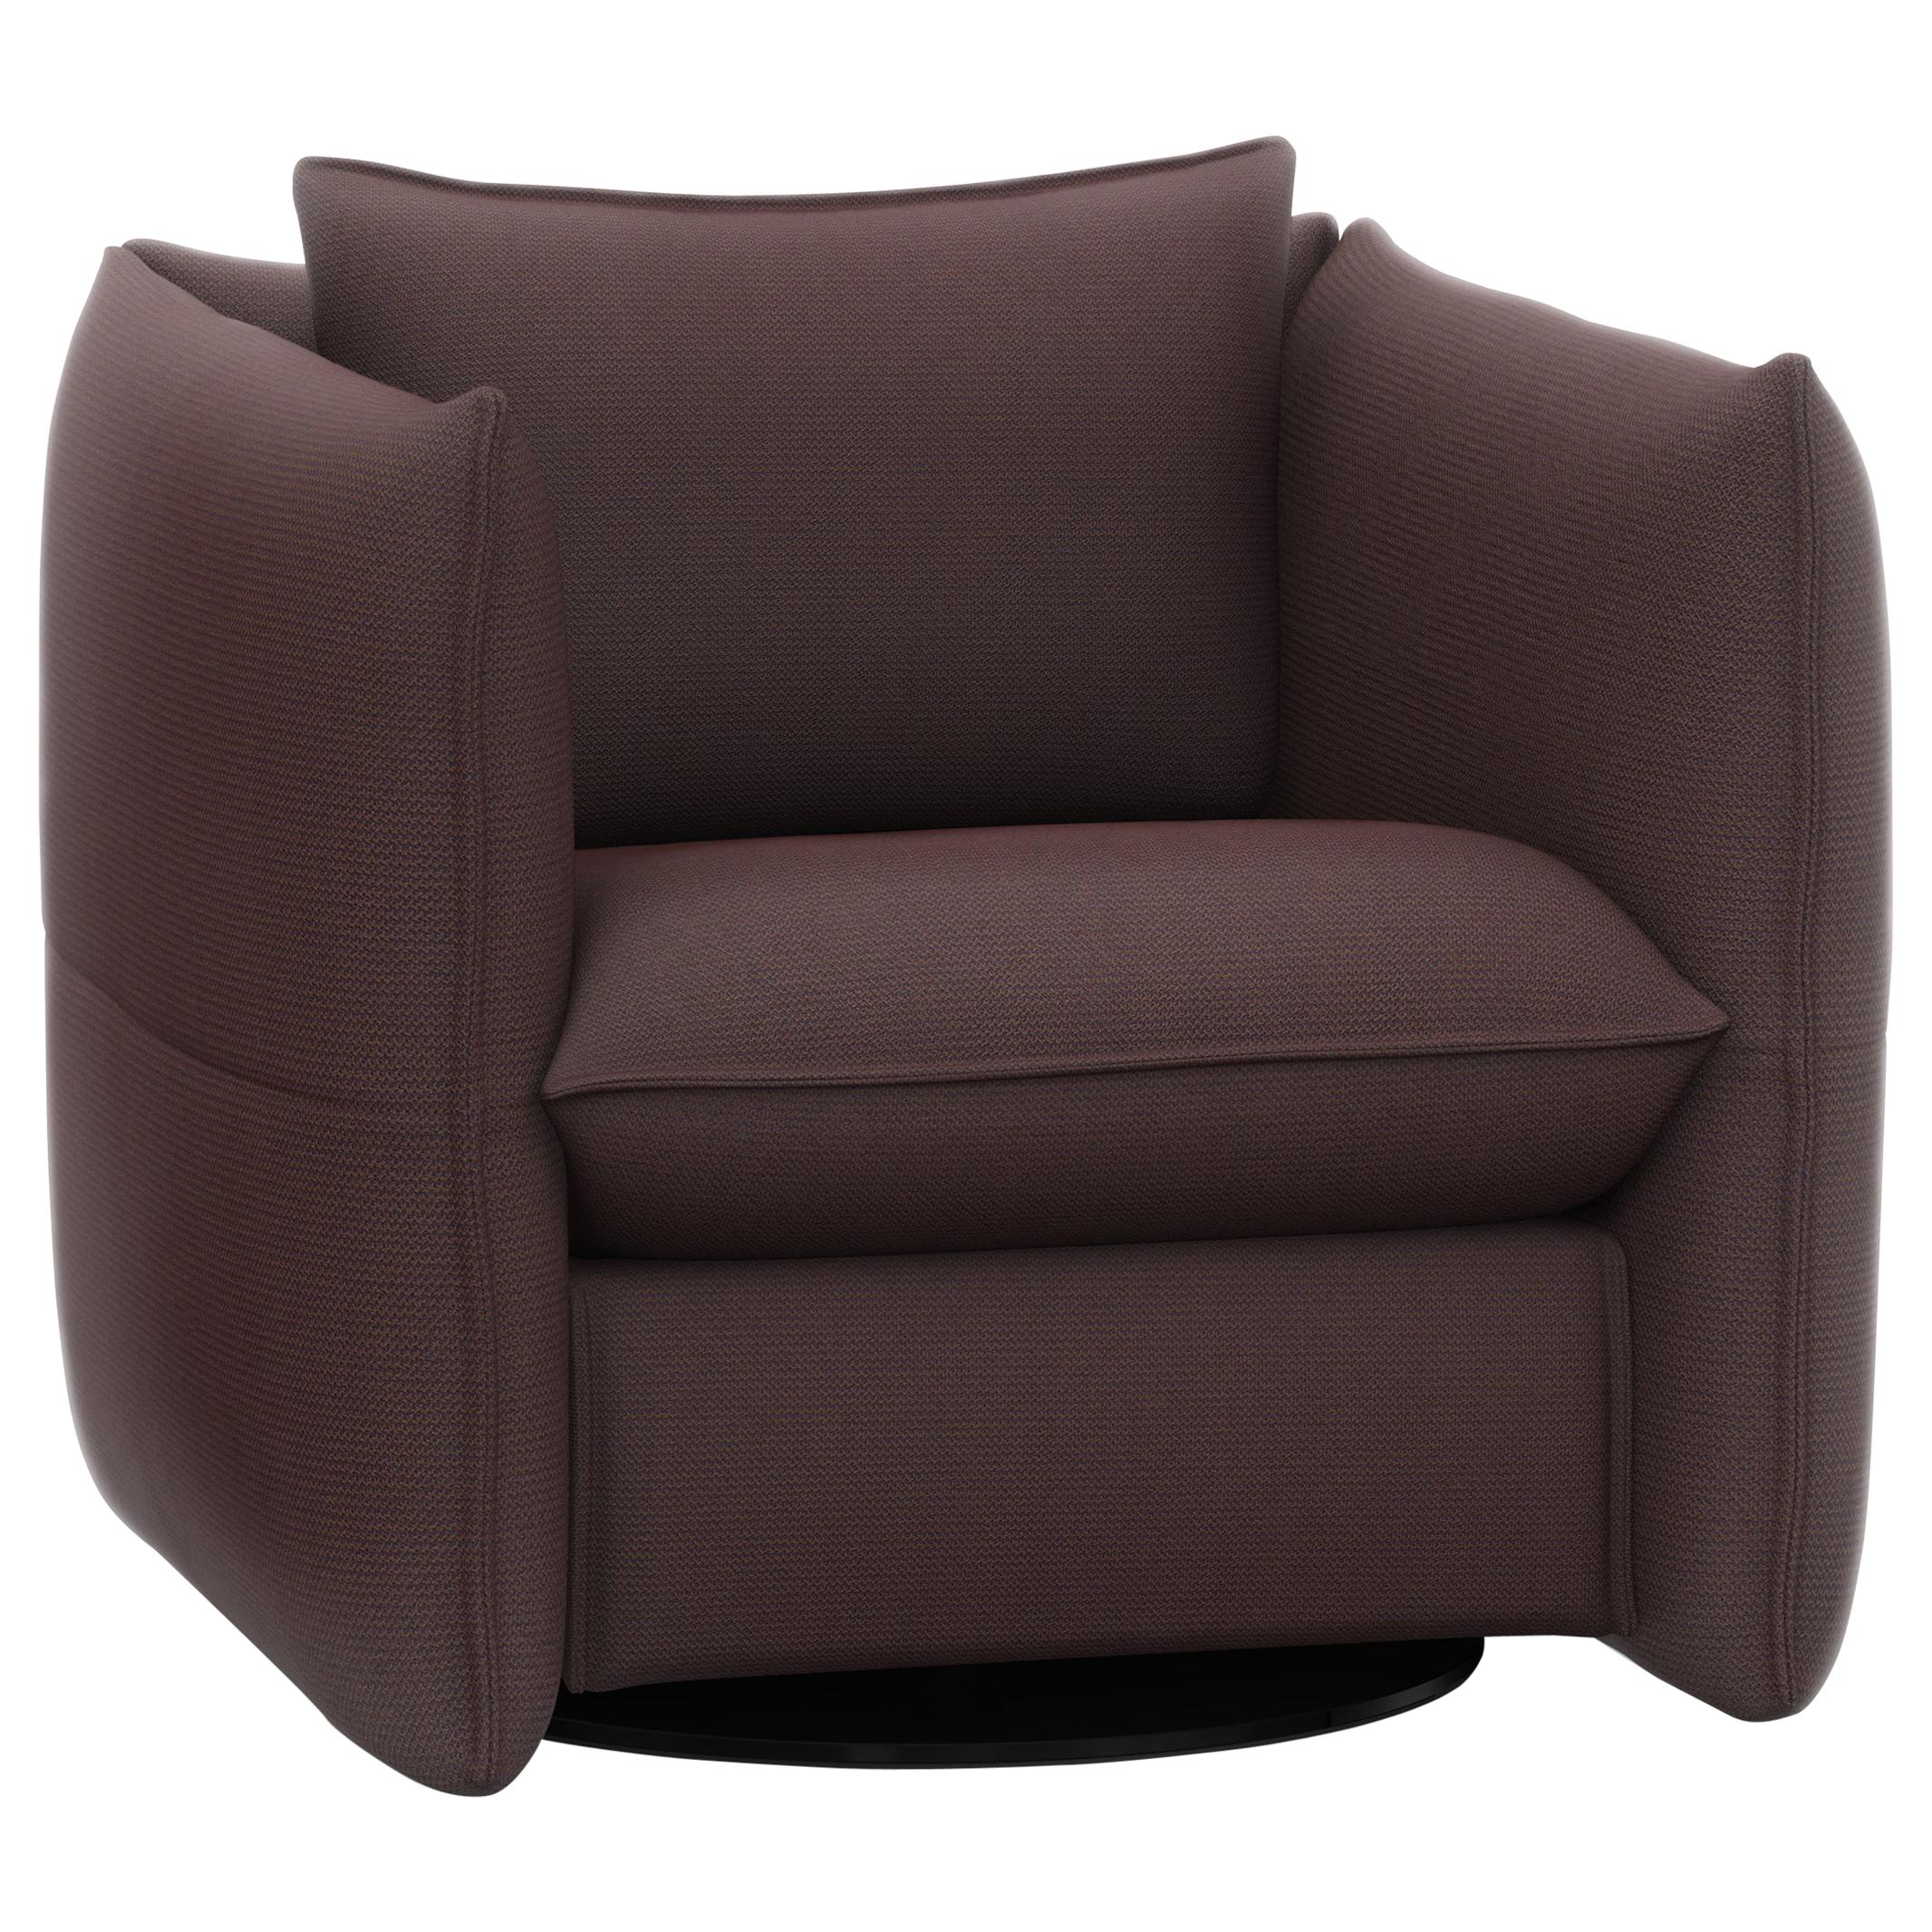 Vitra Mariposa Club Armchair in Bitter Chocolate by Edward Barber & Jay Osgerby  For Sale